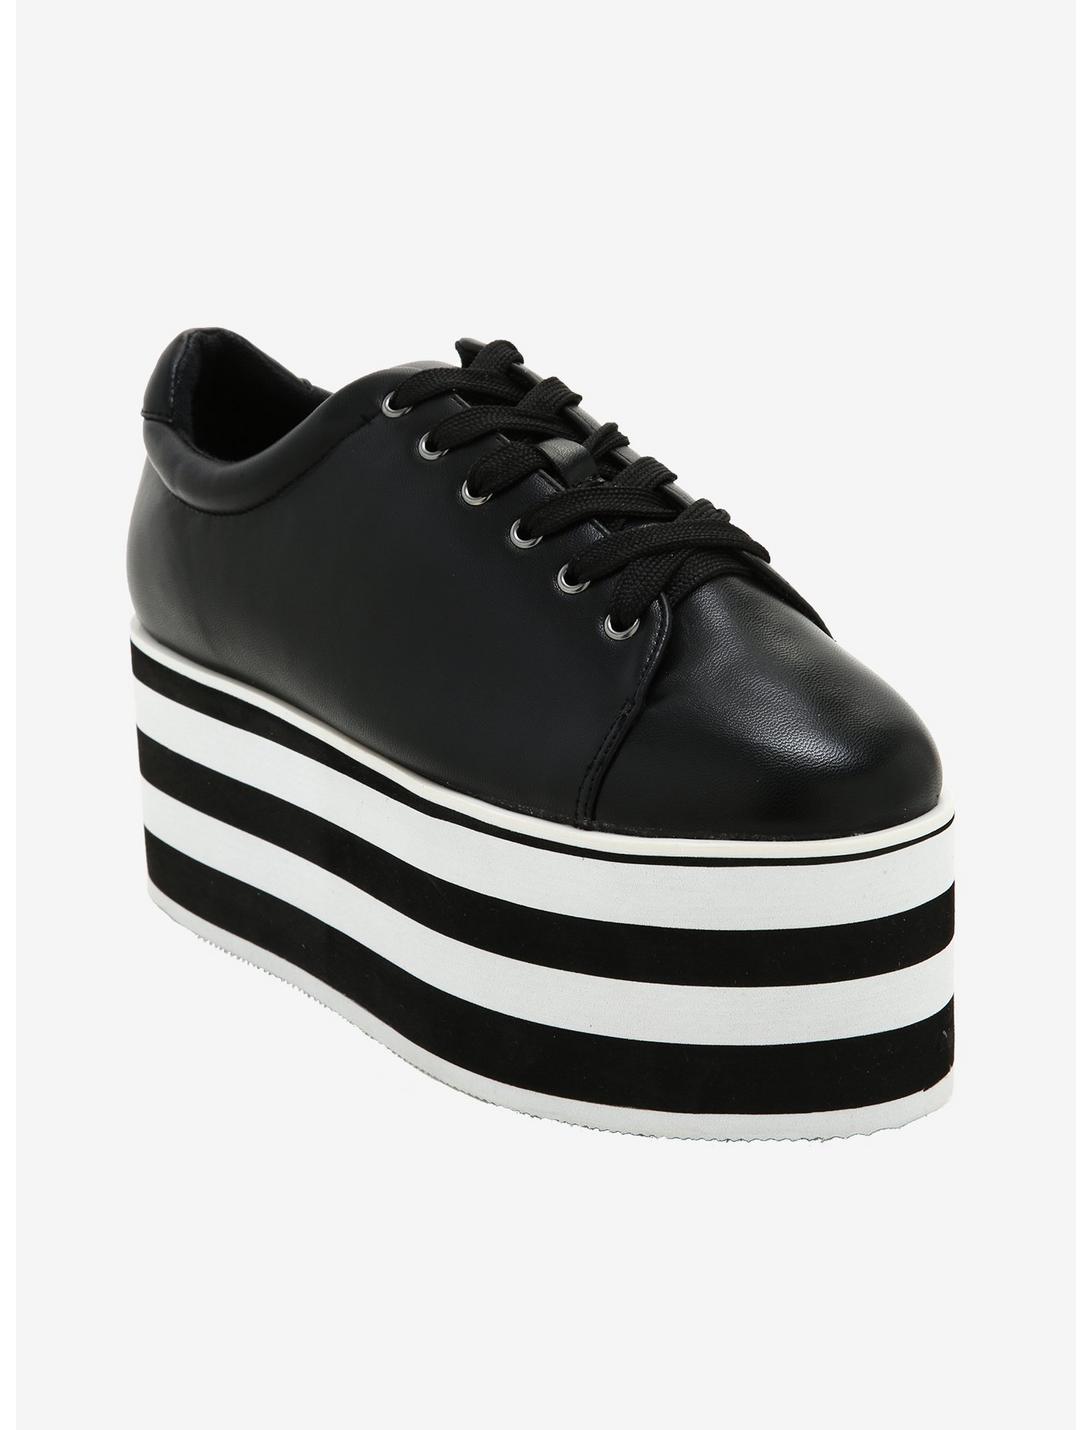 Black With Striped Sole Platform Sneakers | Hot Topic